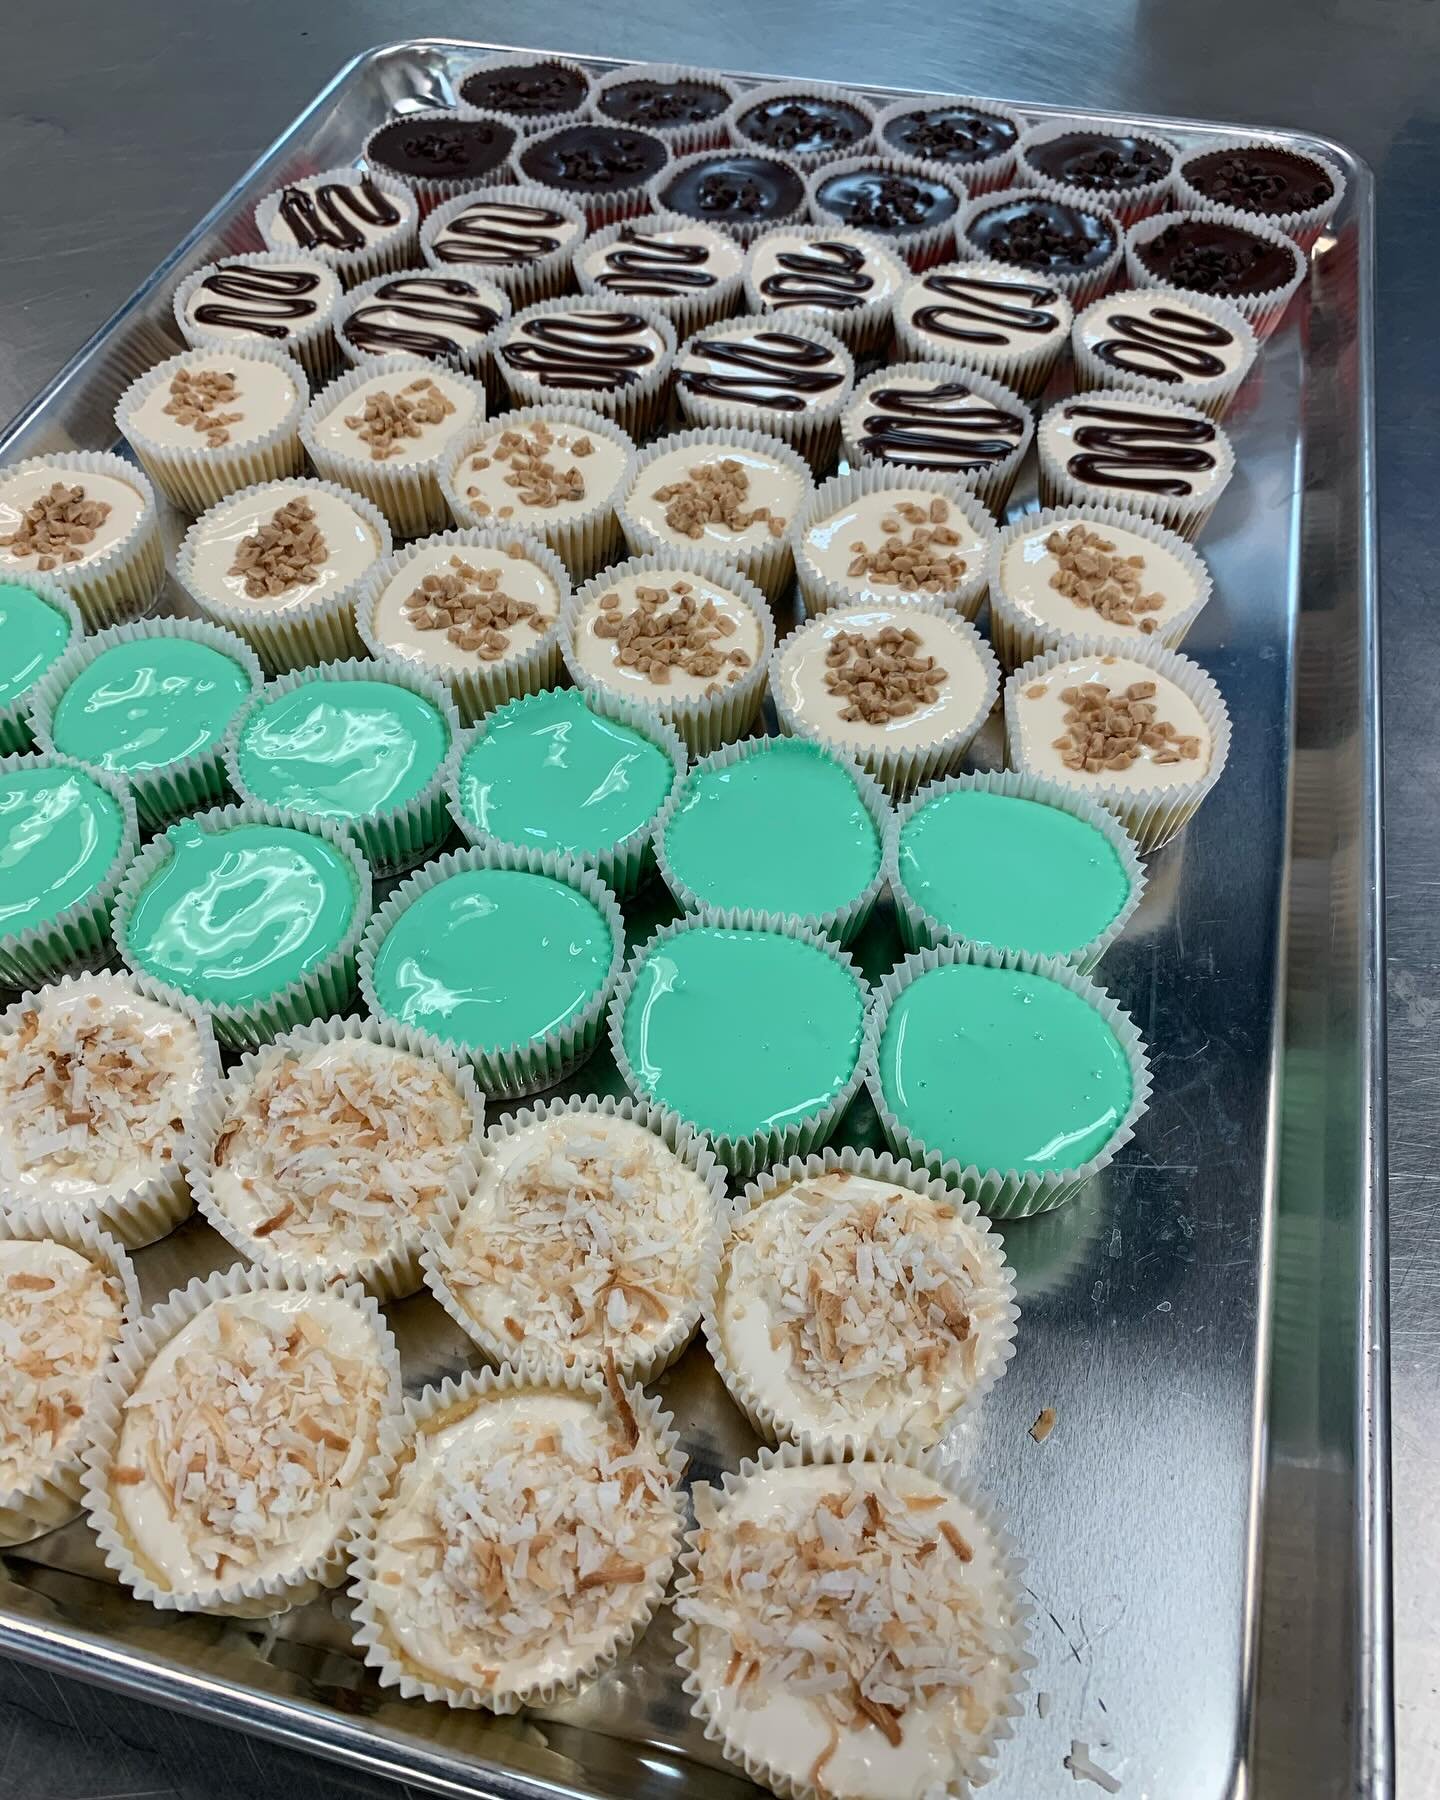 Before we boxed the bites; and after! 😁

11 Sample Boxes available- $15 per box
Text Curt at 763-639-5778 (give us your first and last name if it&rsquo;s your first time ordering)
Pick Up Wednesday 9:00-6:00

Flavors-
Lime
PeanutButter Mocha
Raspber